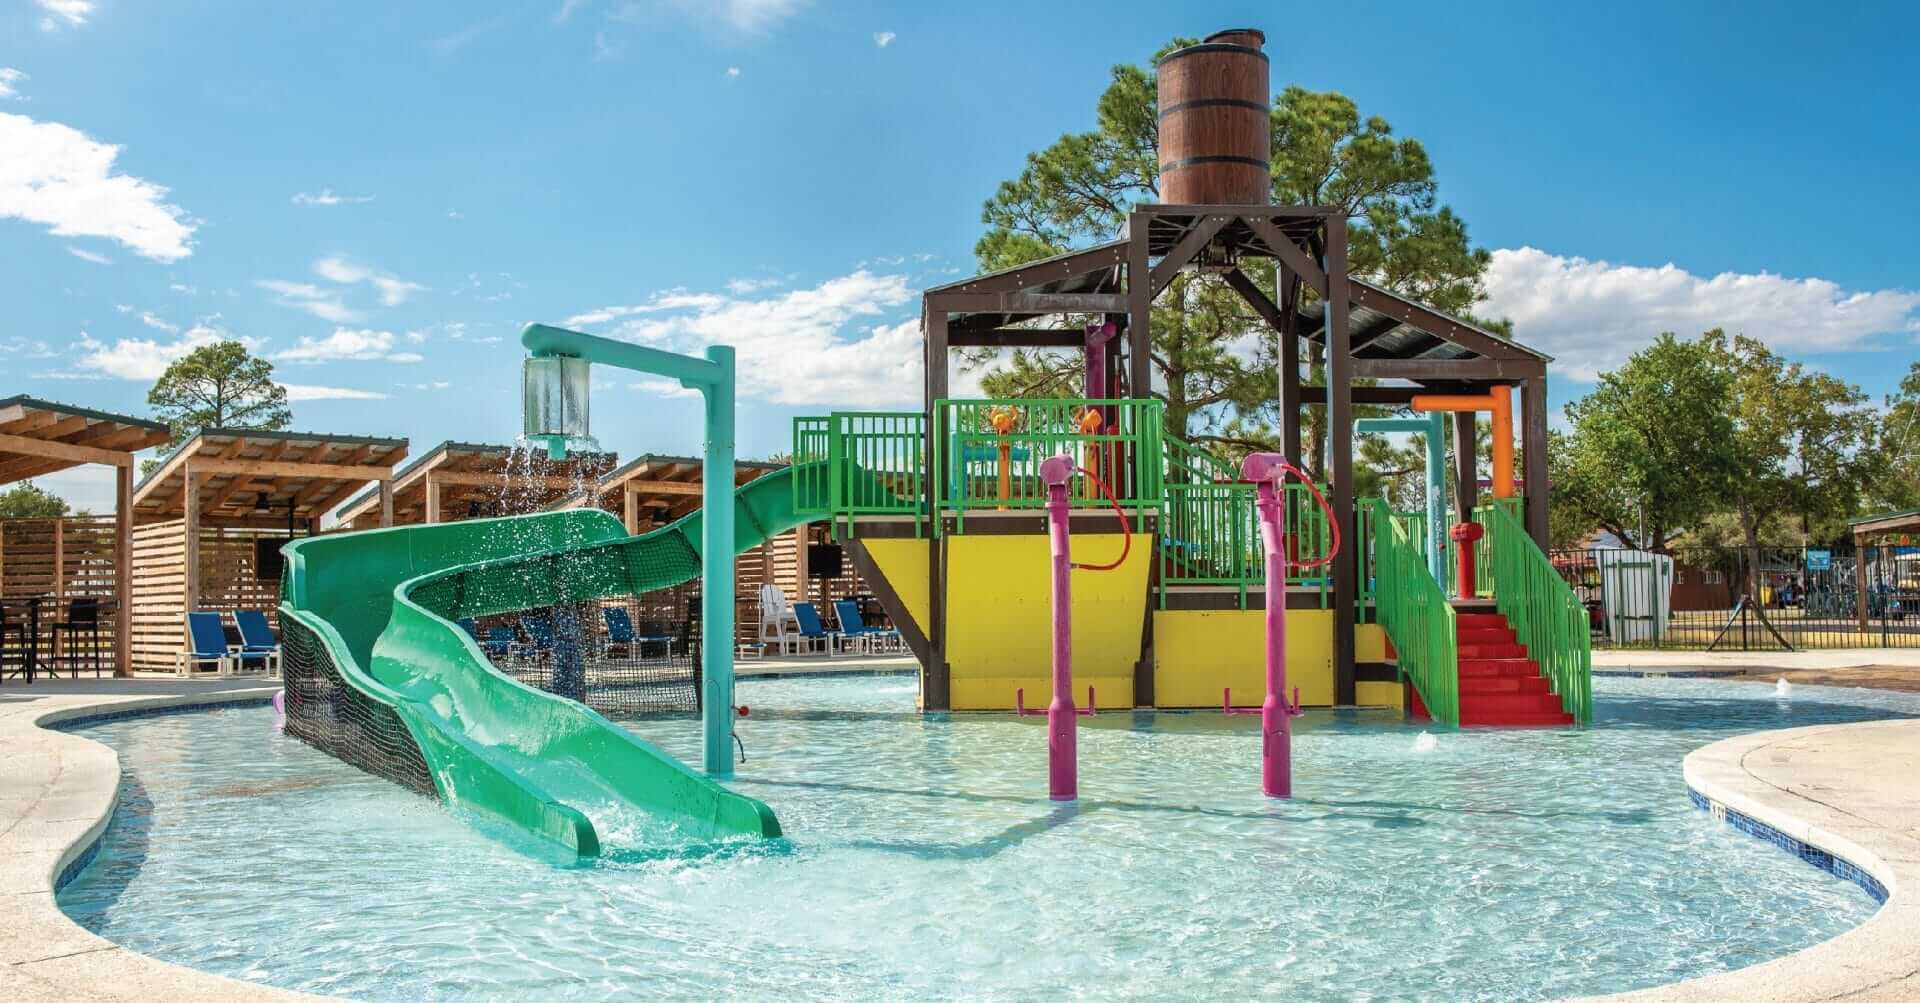 A photo of the aquatic play structure by Interactive play with the power plunge feature releasing a large volume of water at the RV resort in Waller, Texas.